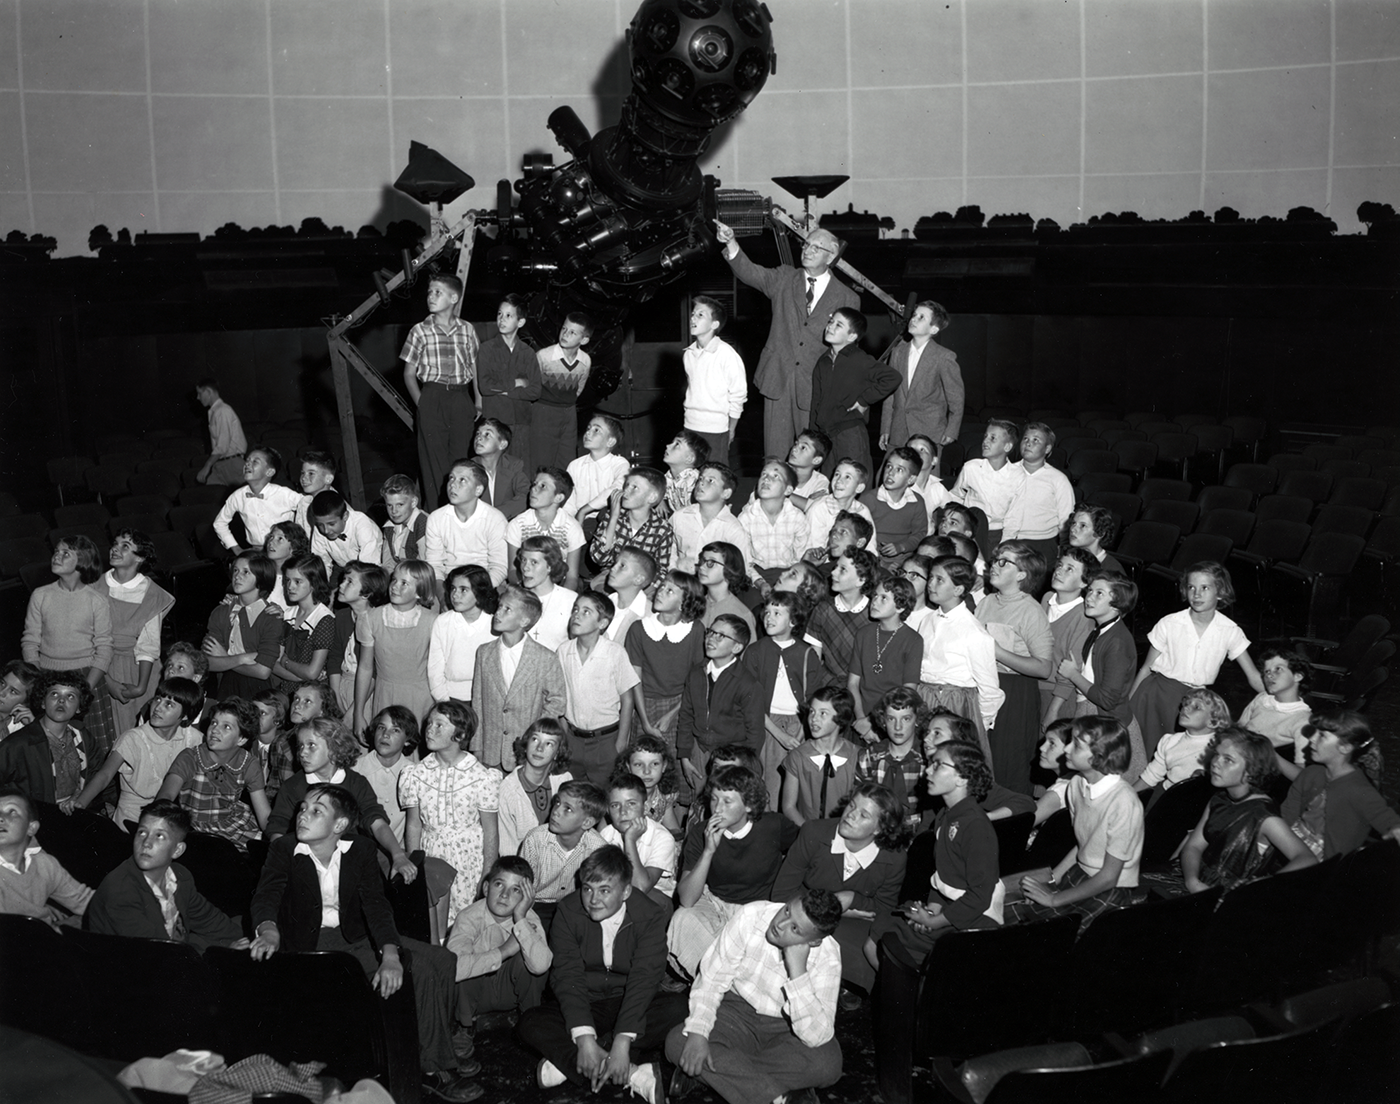 A group of school students in front of the Zeiss projector at Morehead Planetarium.